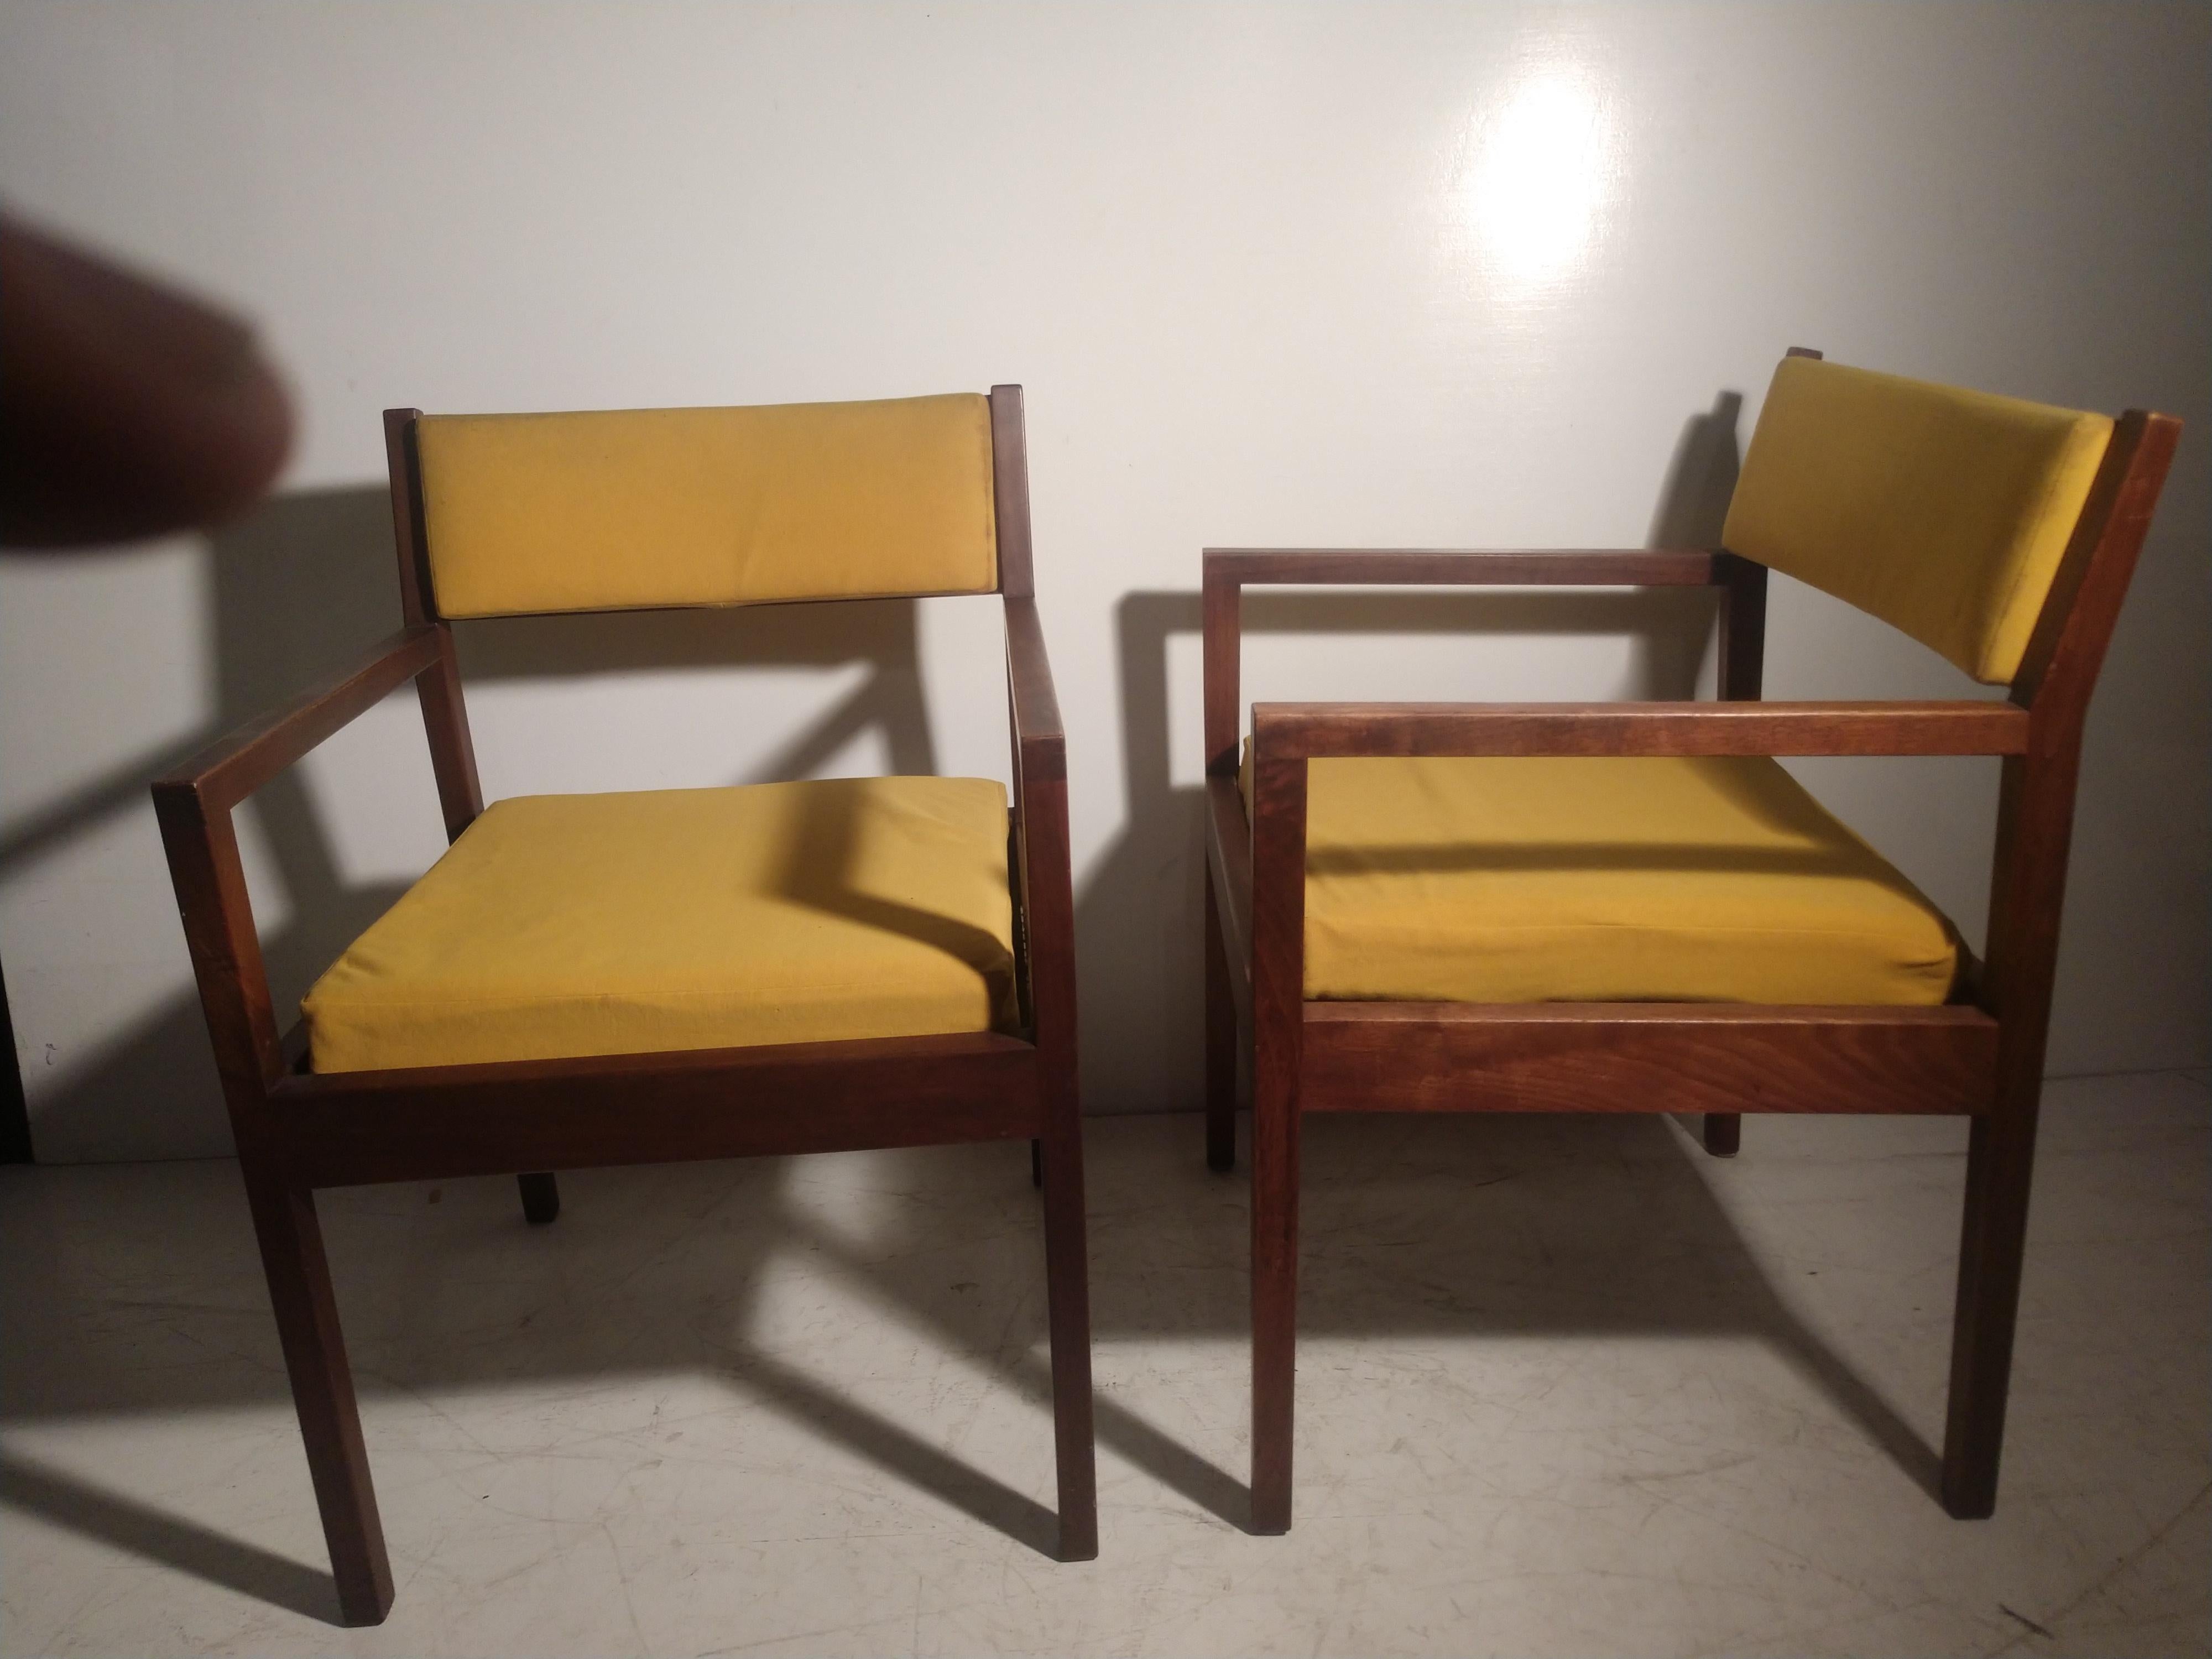 Pair of Mid-Century Modern Walnut Armchairs by George Nelson for Herman Miller 3